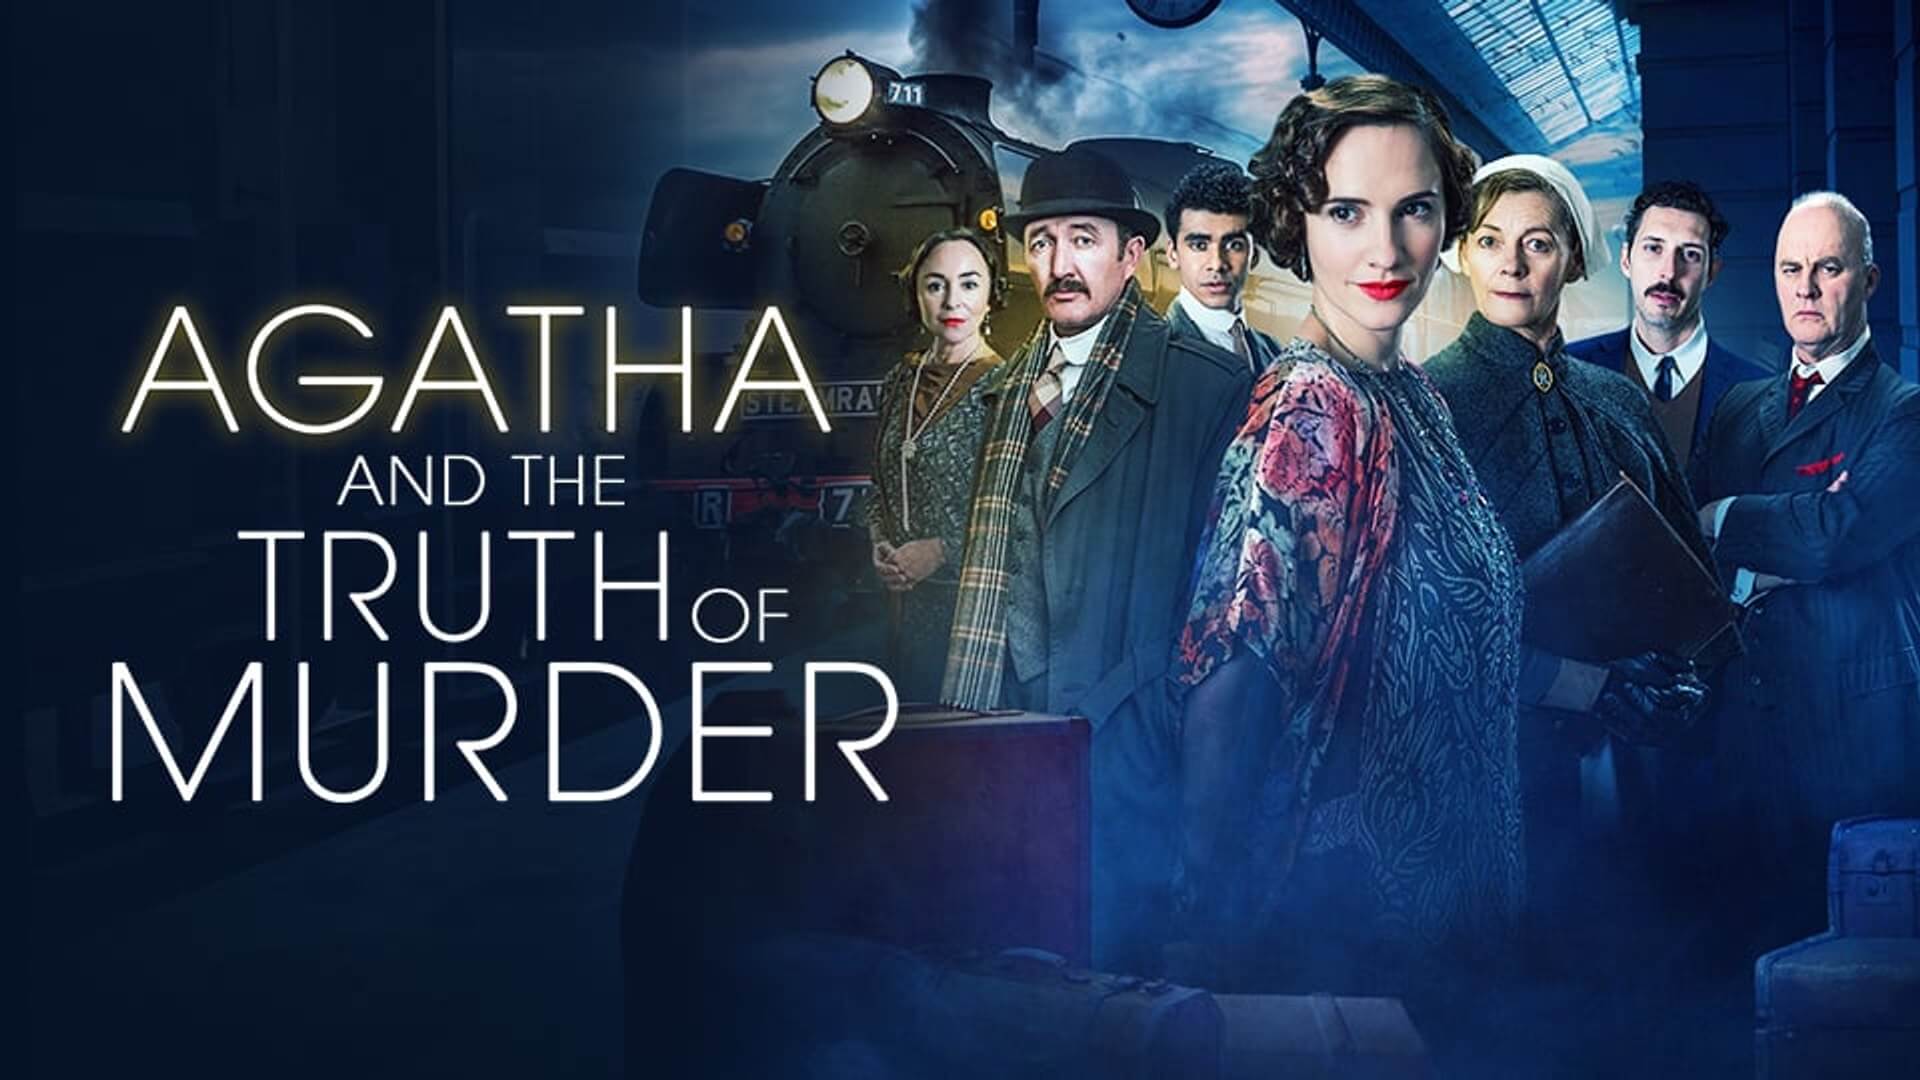 Agatha and the Truth of Murder (2018) movie download